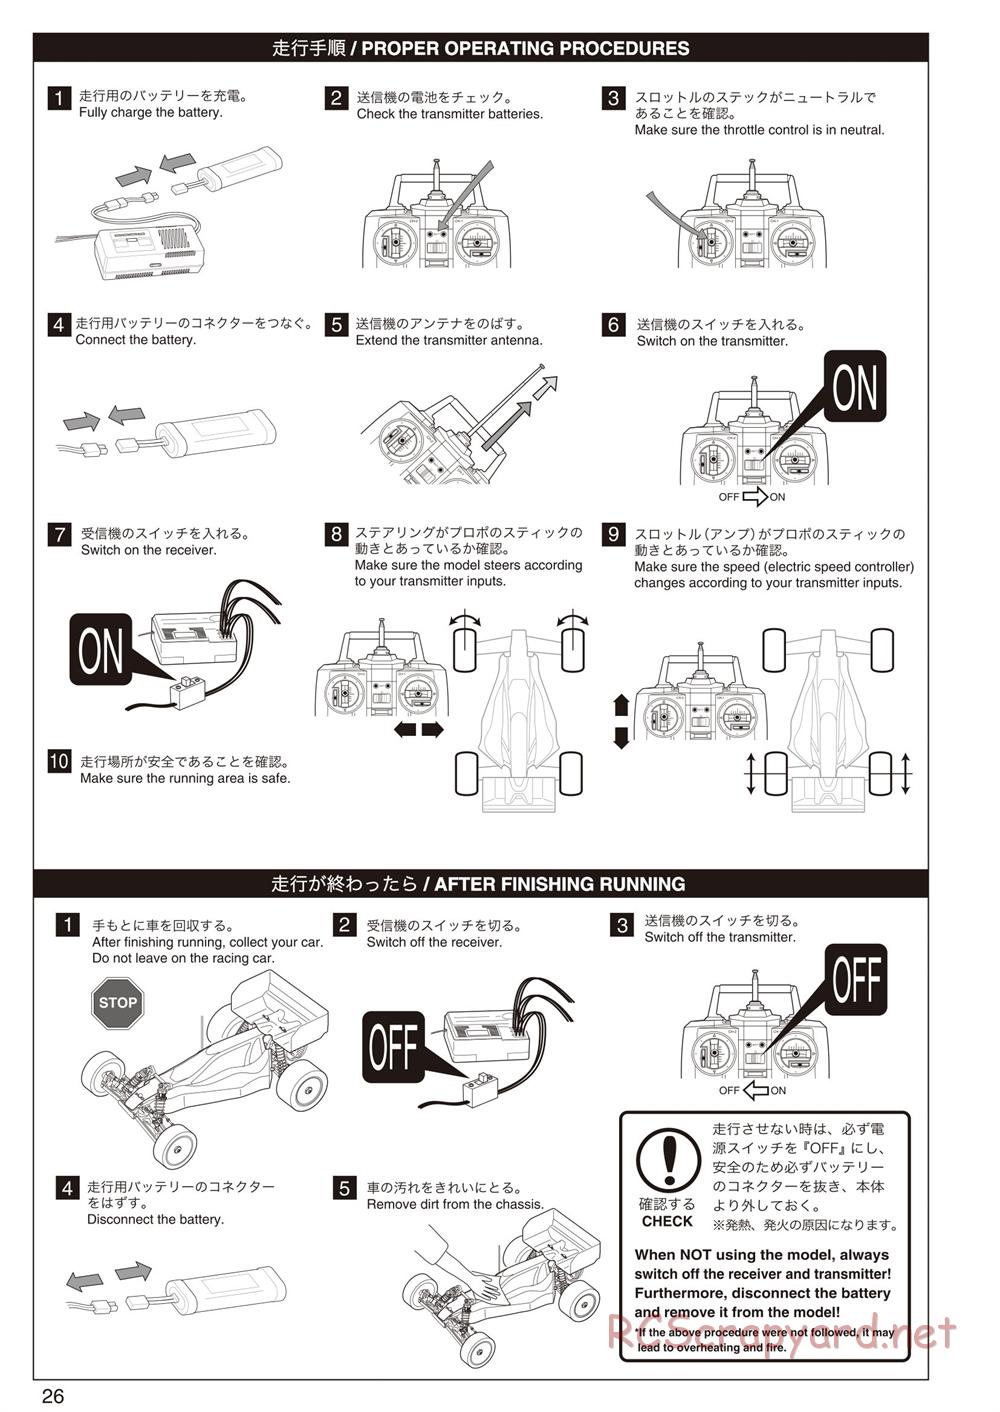 Kyosho - Ultima RB5 SP - Manual - Page 26